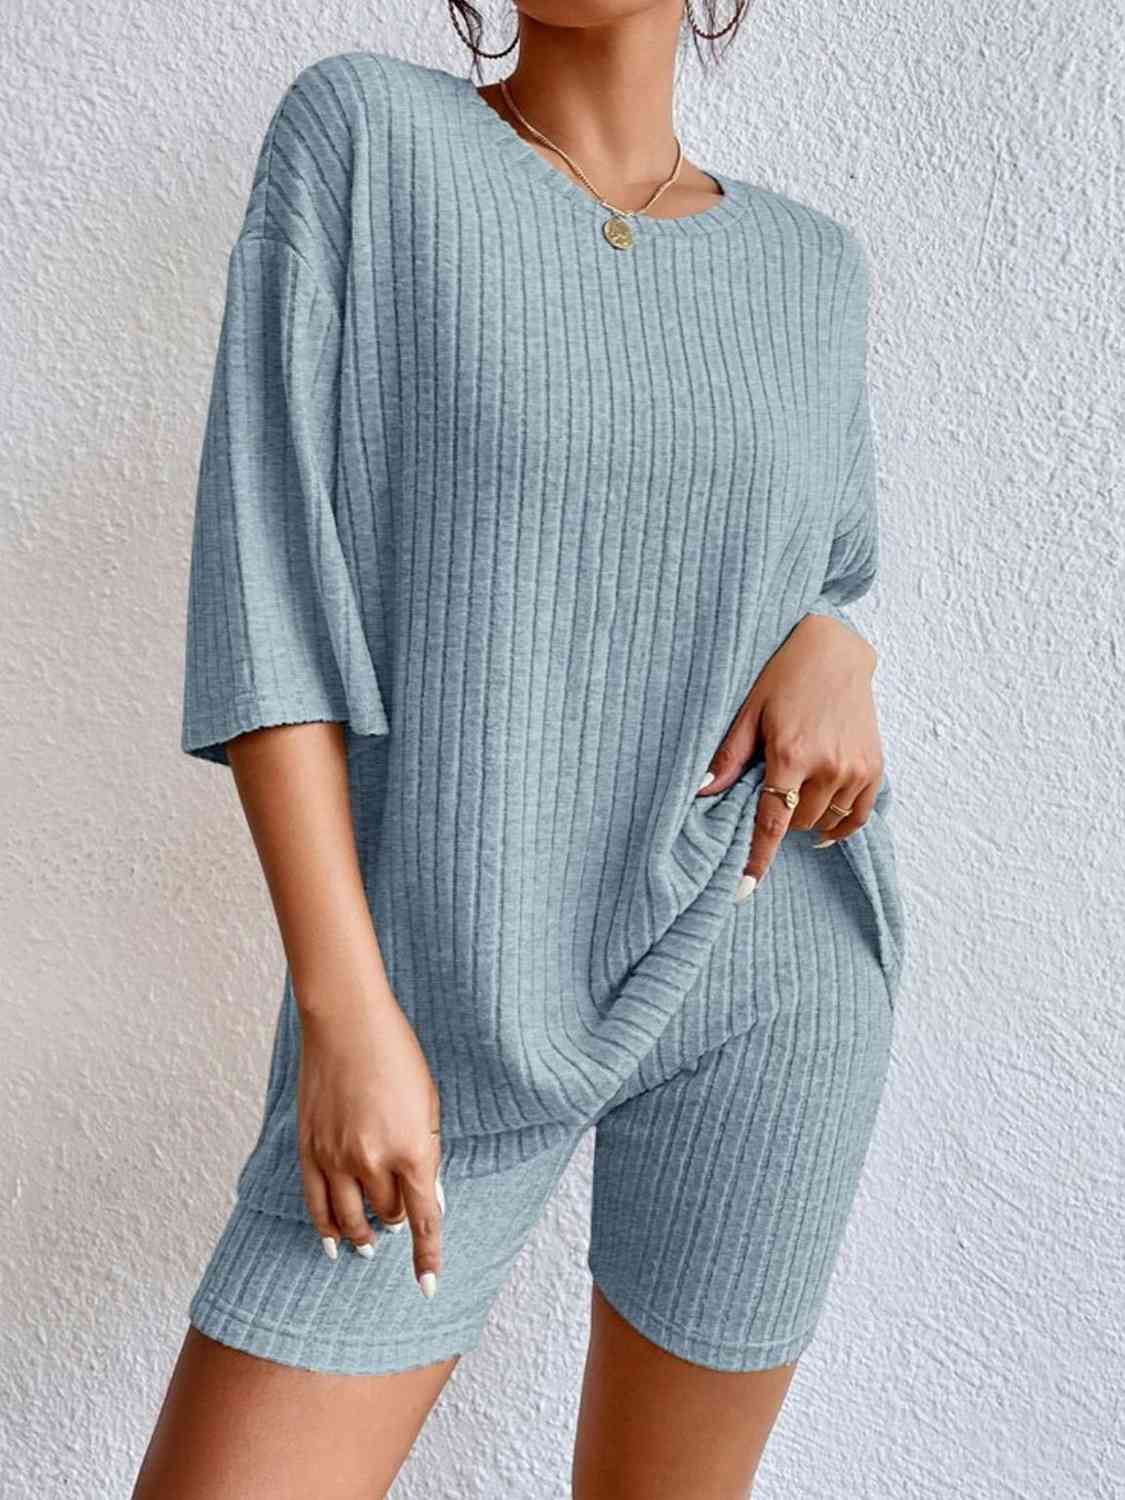 RIBBED KNIT OVERSIZED SHORT SLEEVE TOP AND SLIM FIT LONG SHORTS in Multiple Colors